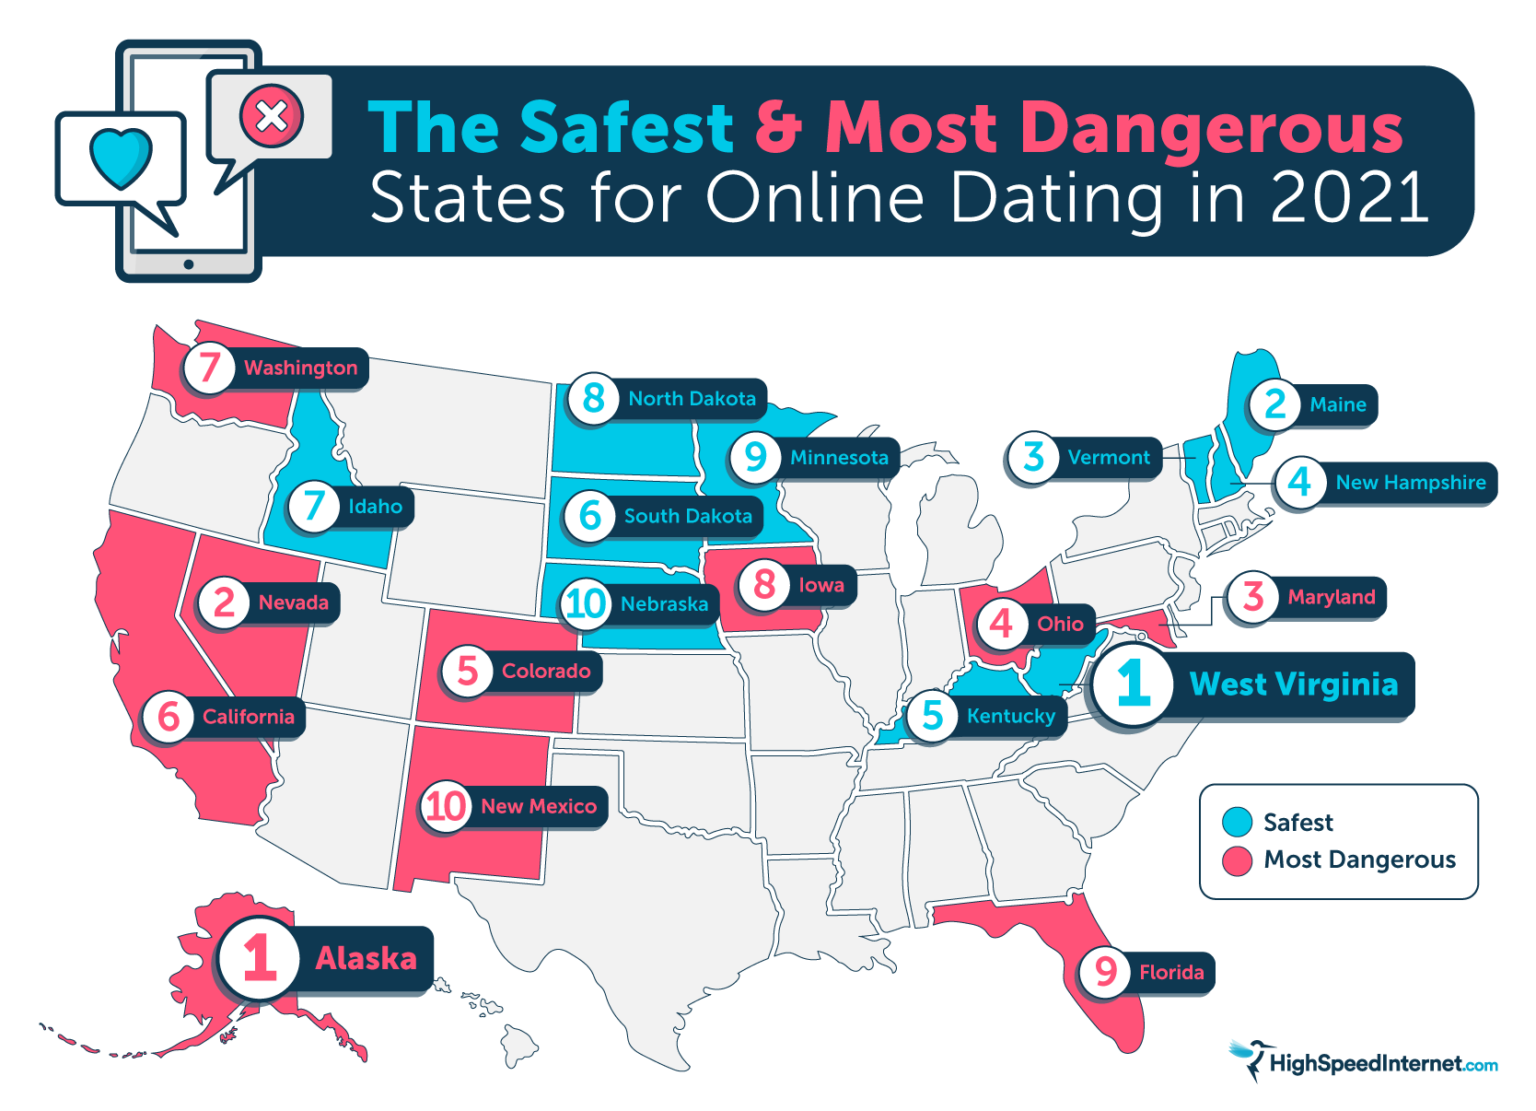 The Safest and Most Dangerous States for Online Dating in 2021